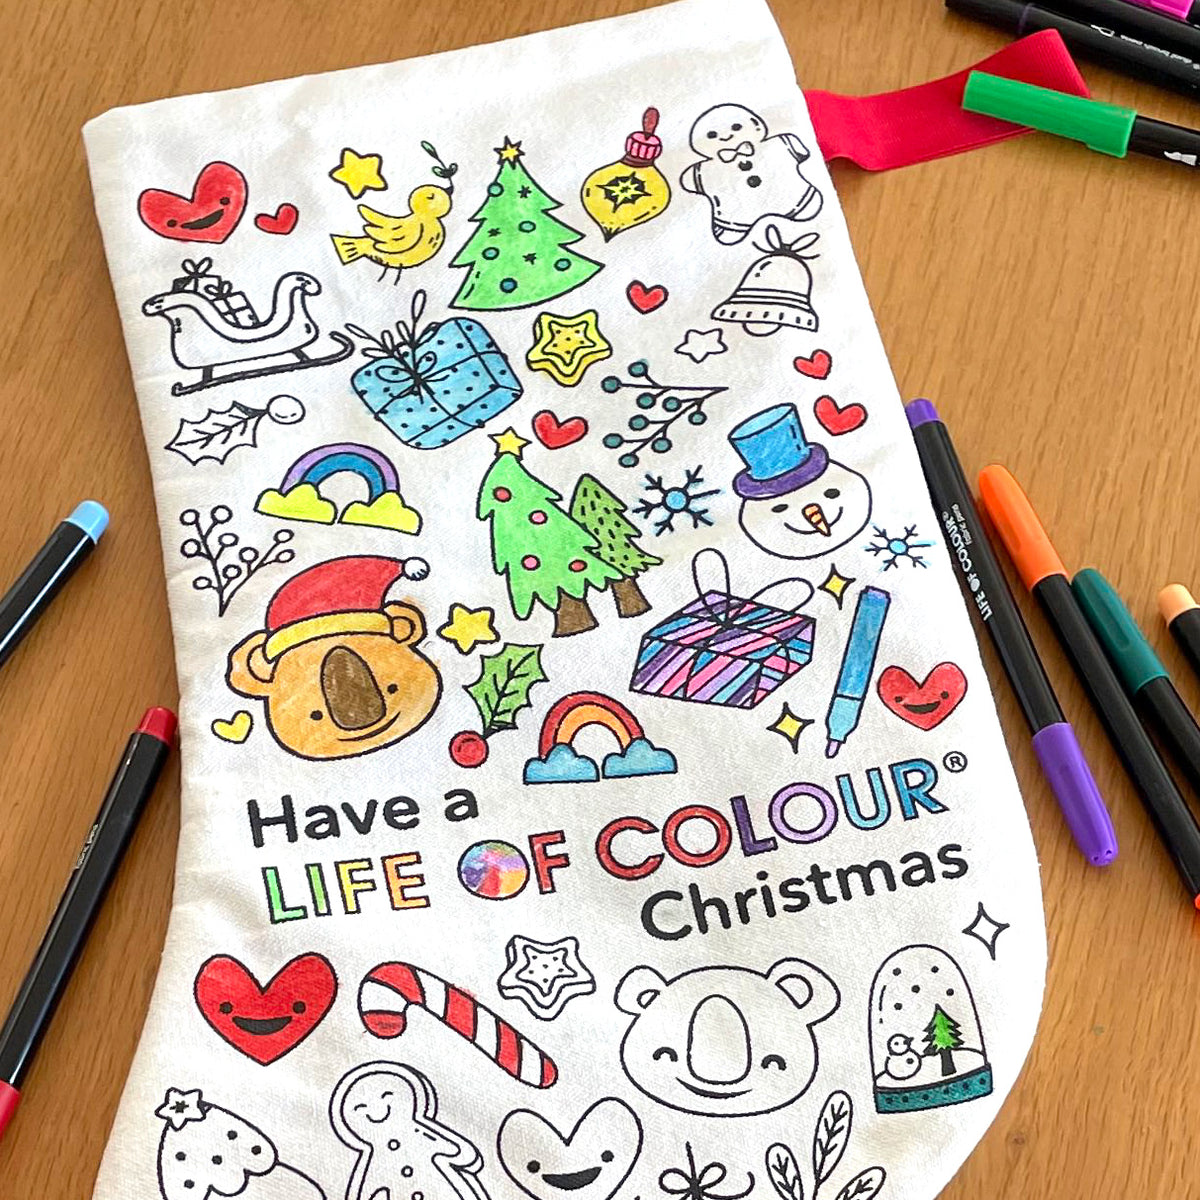 Colour-in Christmas Stocking